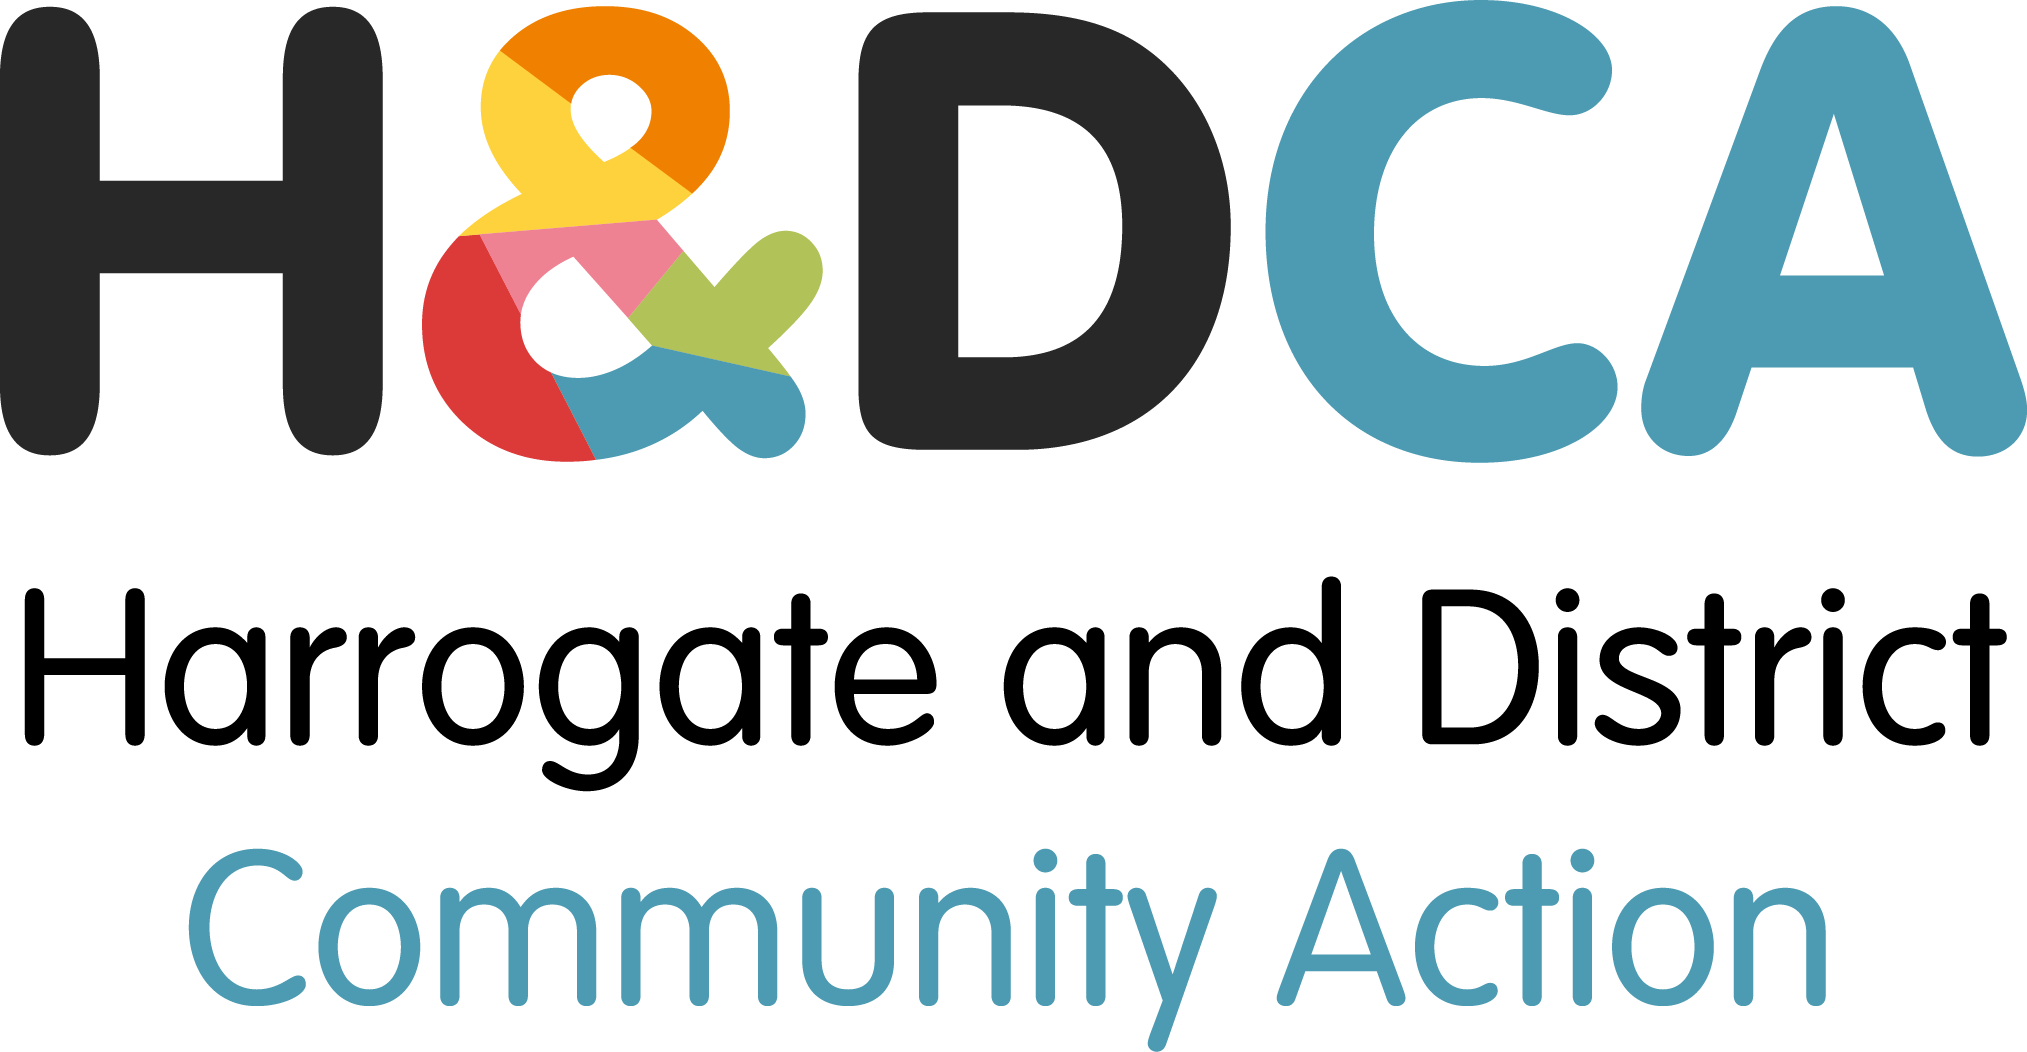 Harrogate and District Community Action